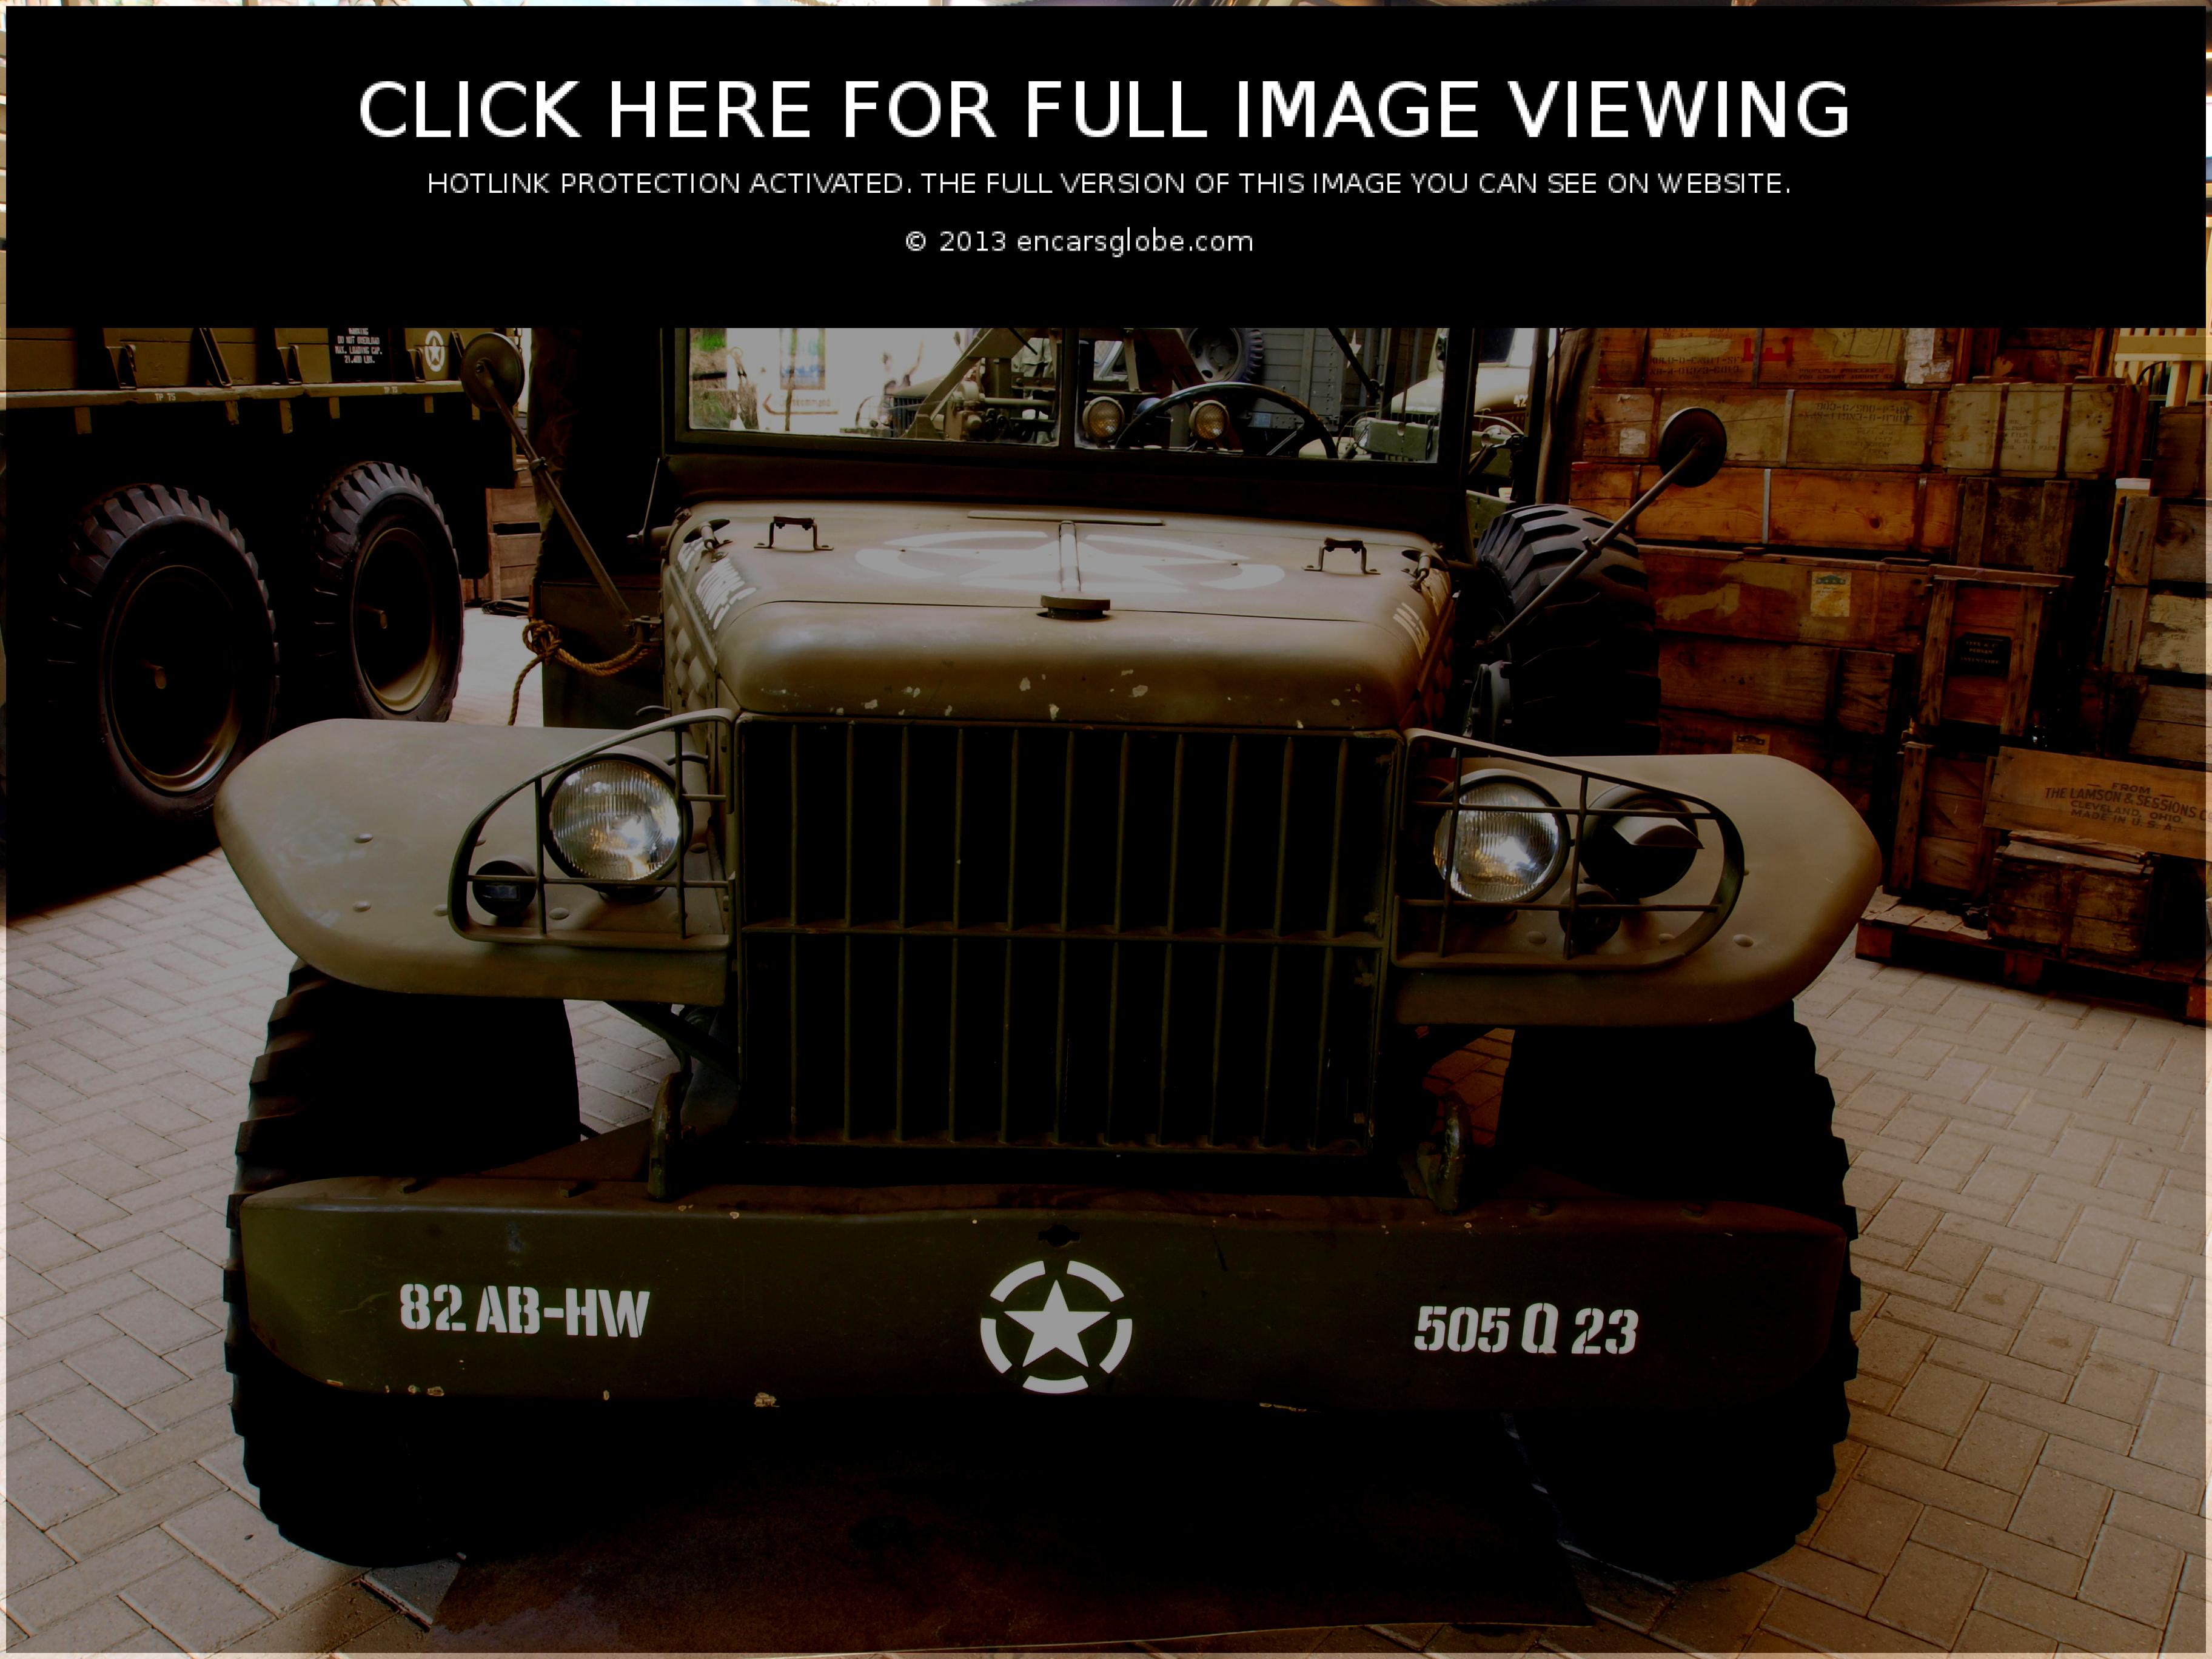 392, Dodge WC-51 Weapon Carrier